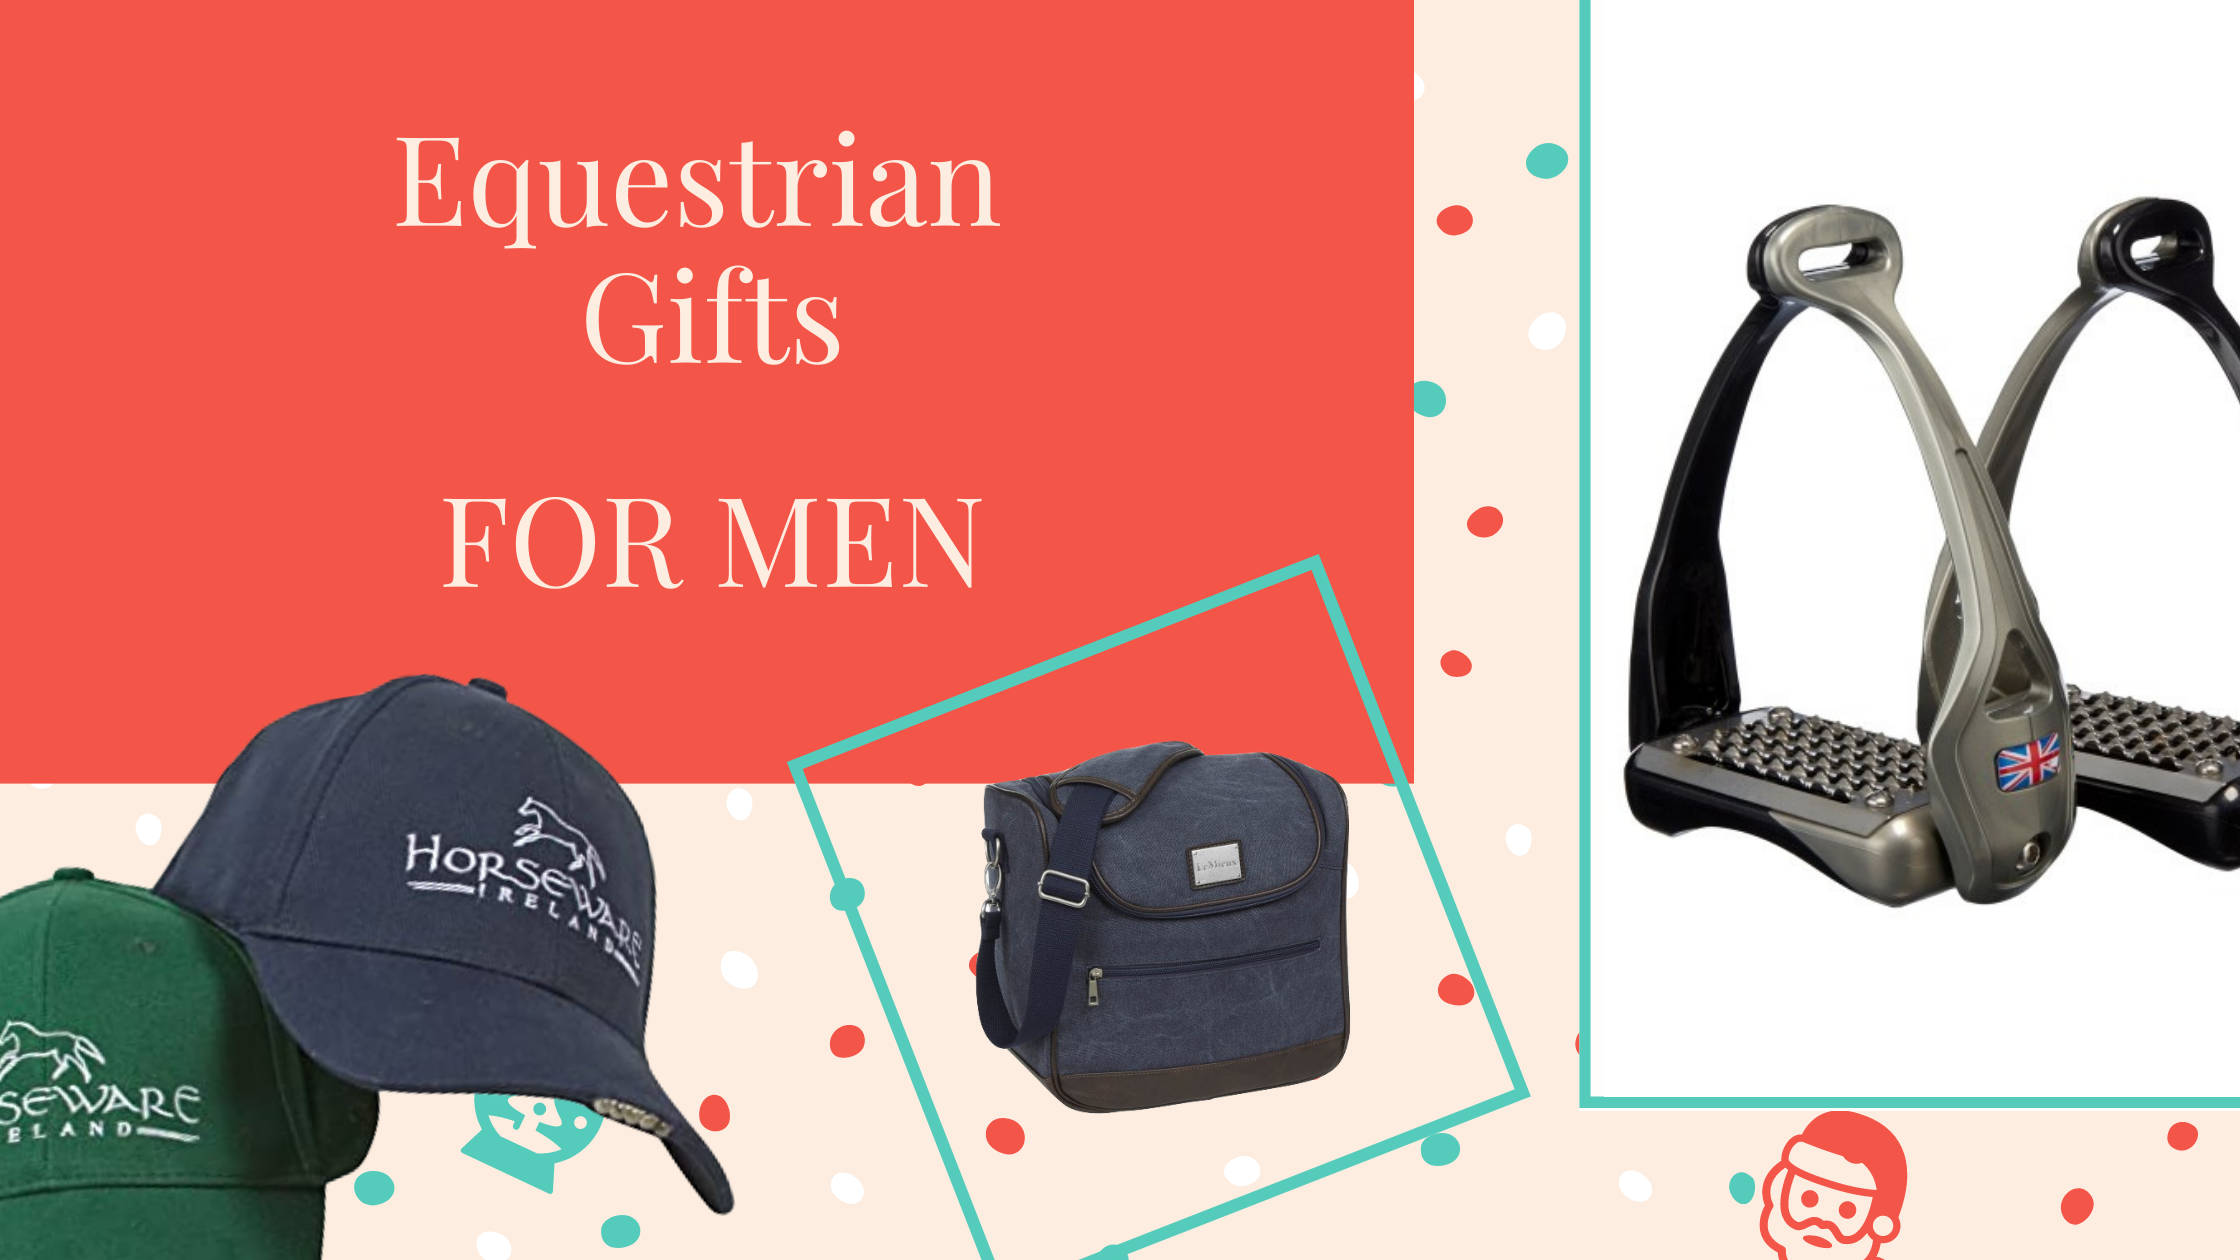 Horse Gifts for Men This Christmas